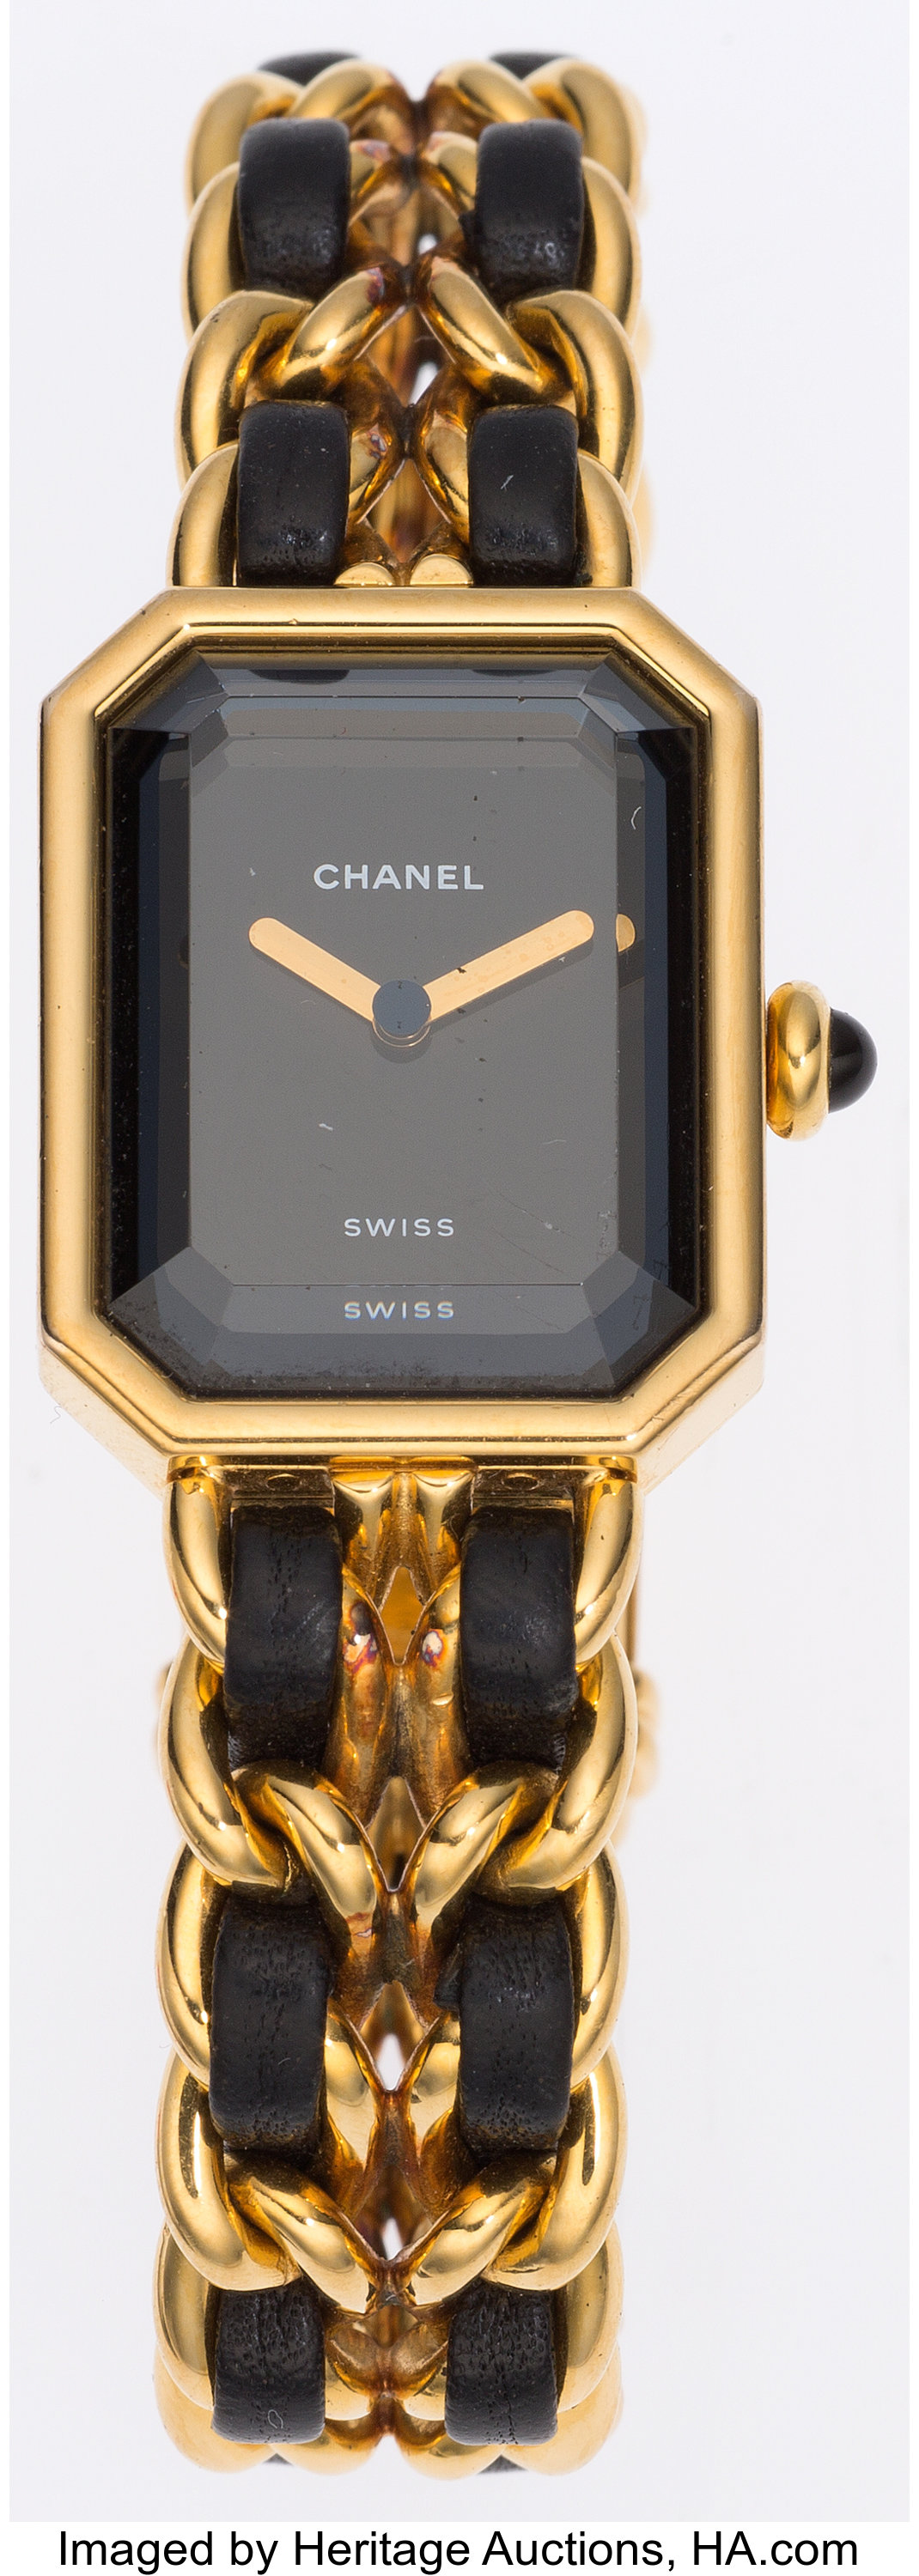 Chanel Premiere Ladies Watch with Classic Gold Chain and Black